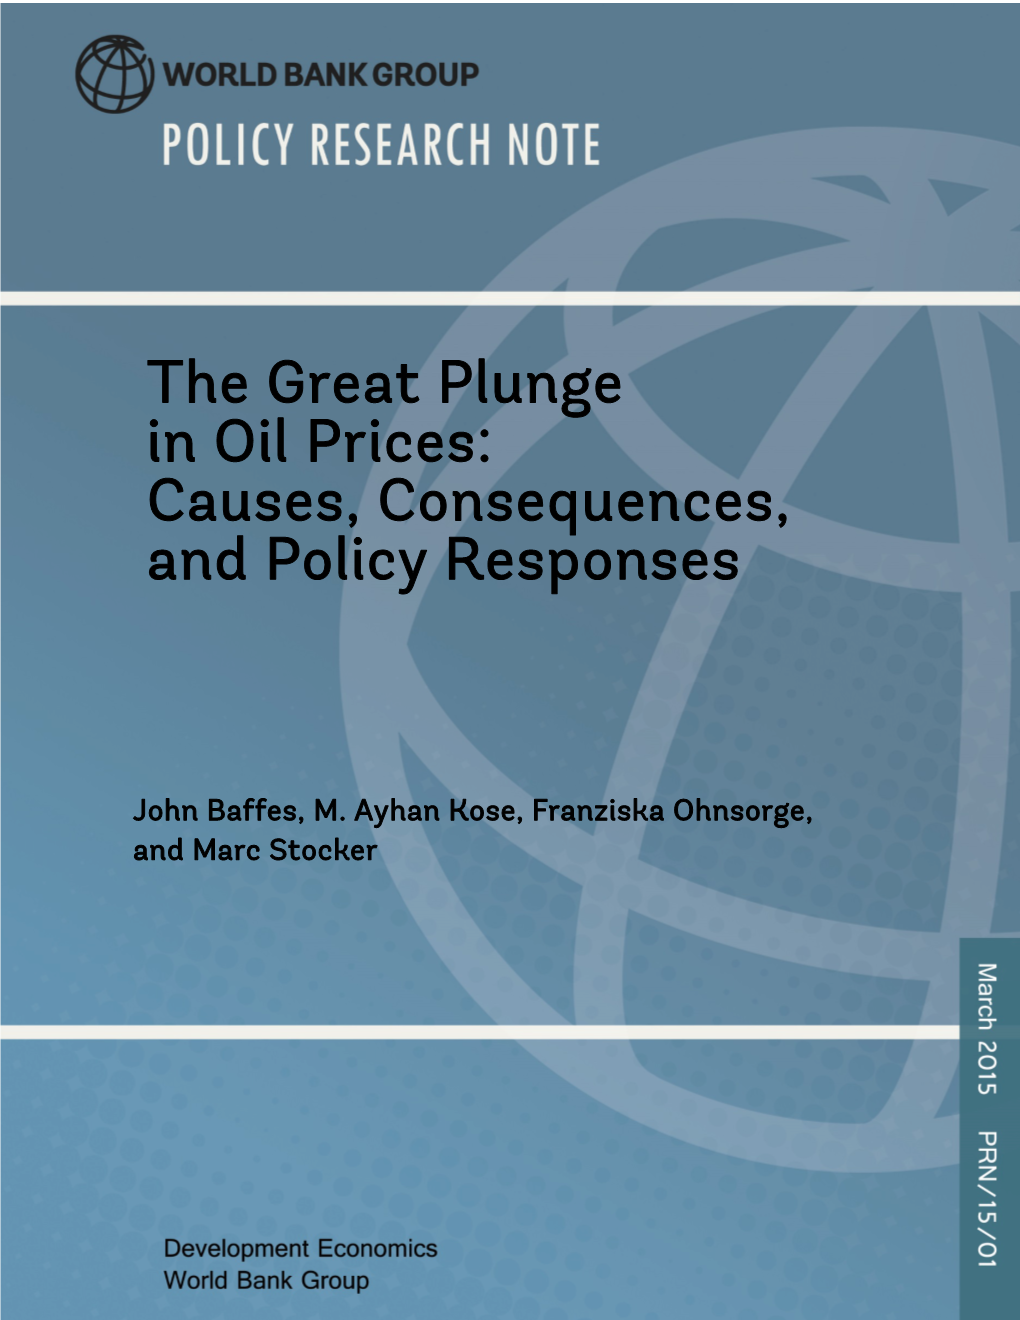 The Great Plunge in Oil Prices: Causes, Consequences, and Policy Responses